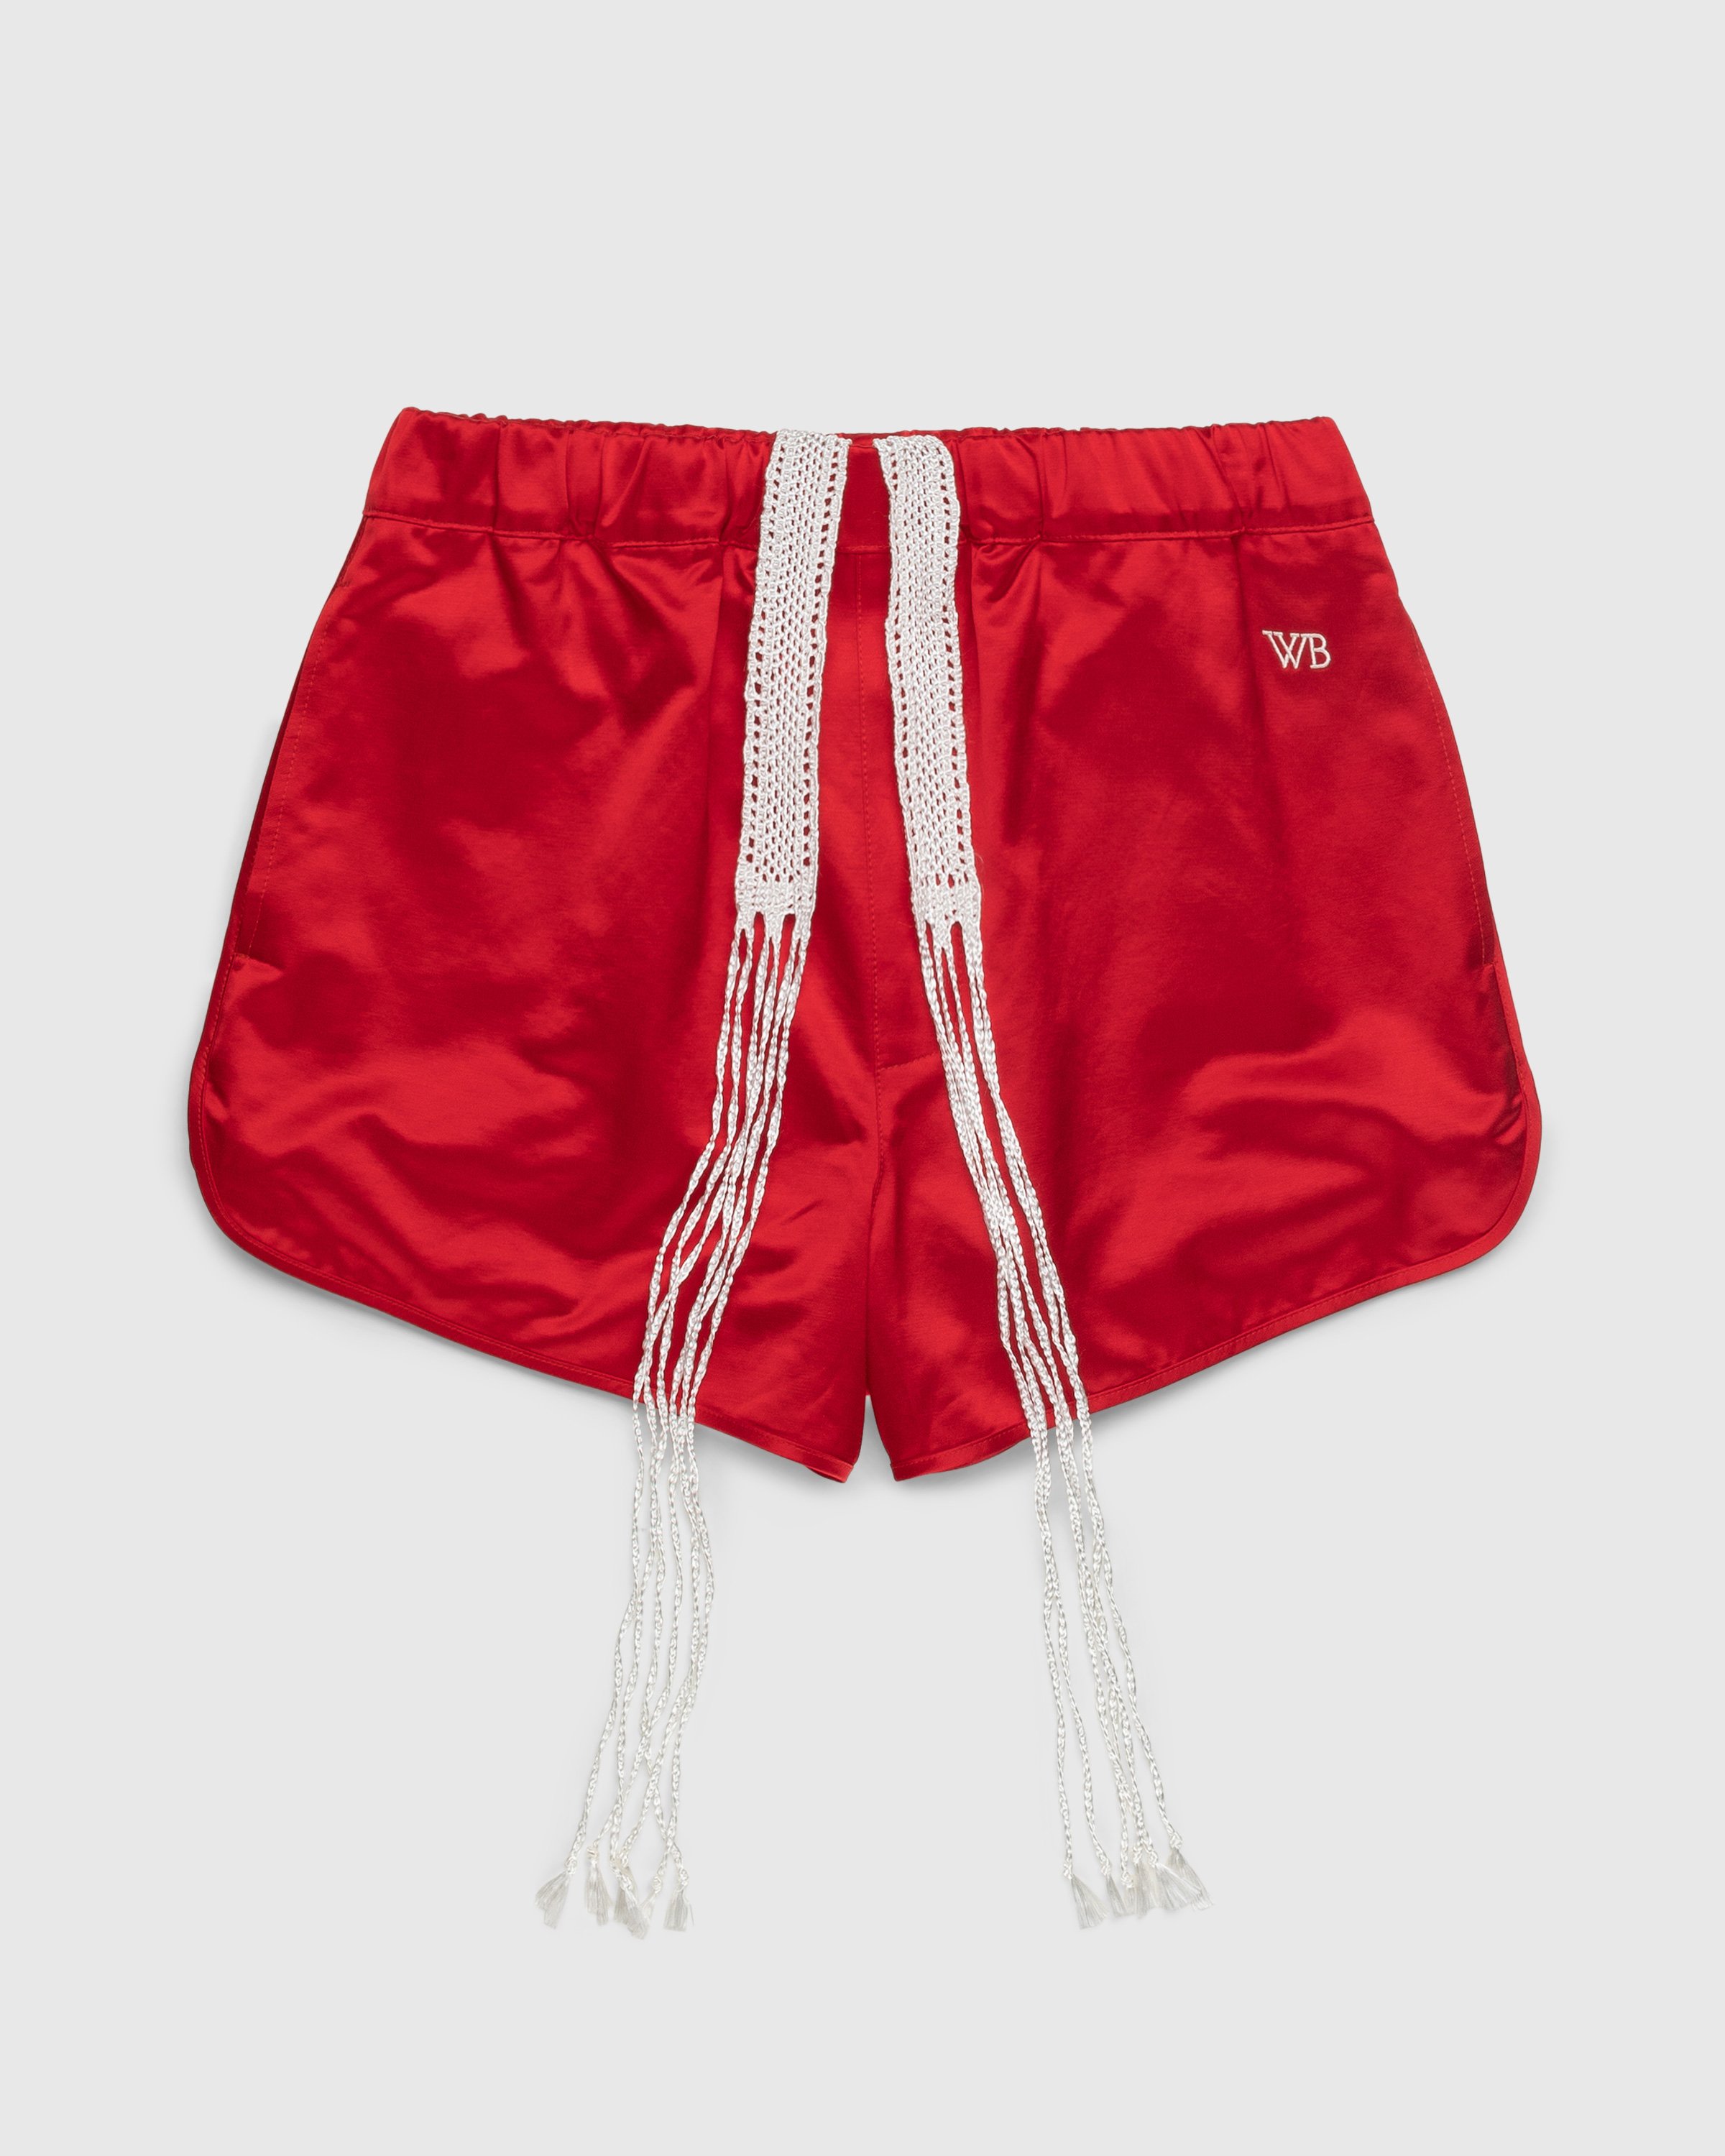 Wales Bonner - Cassette Shorts - Clothing - Red - Image 1